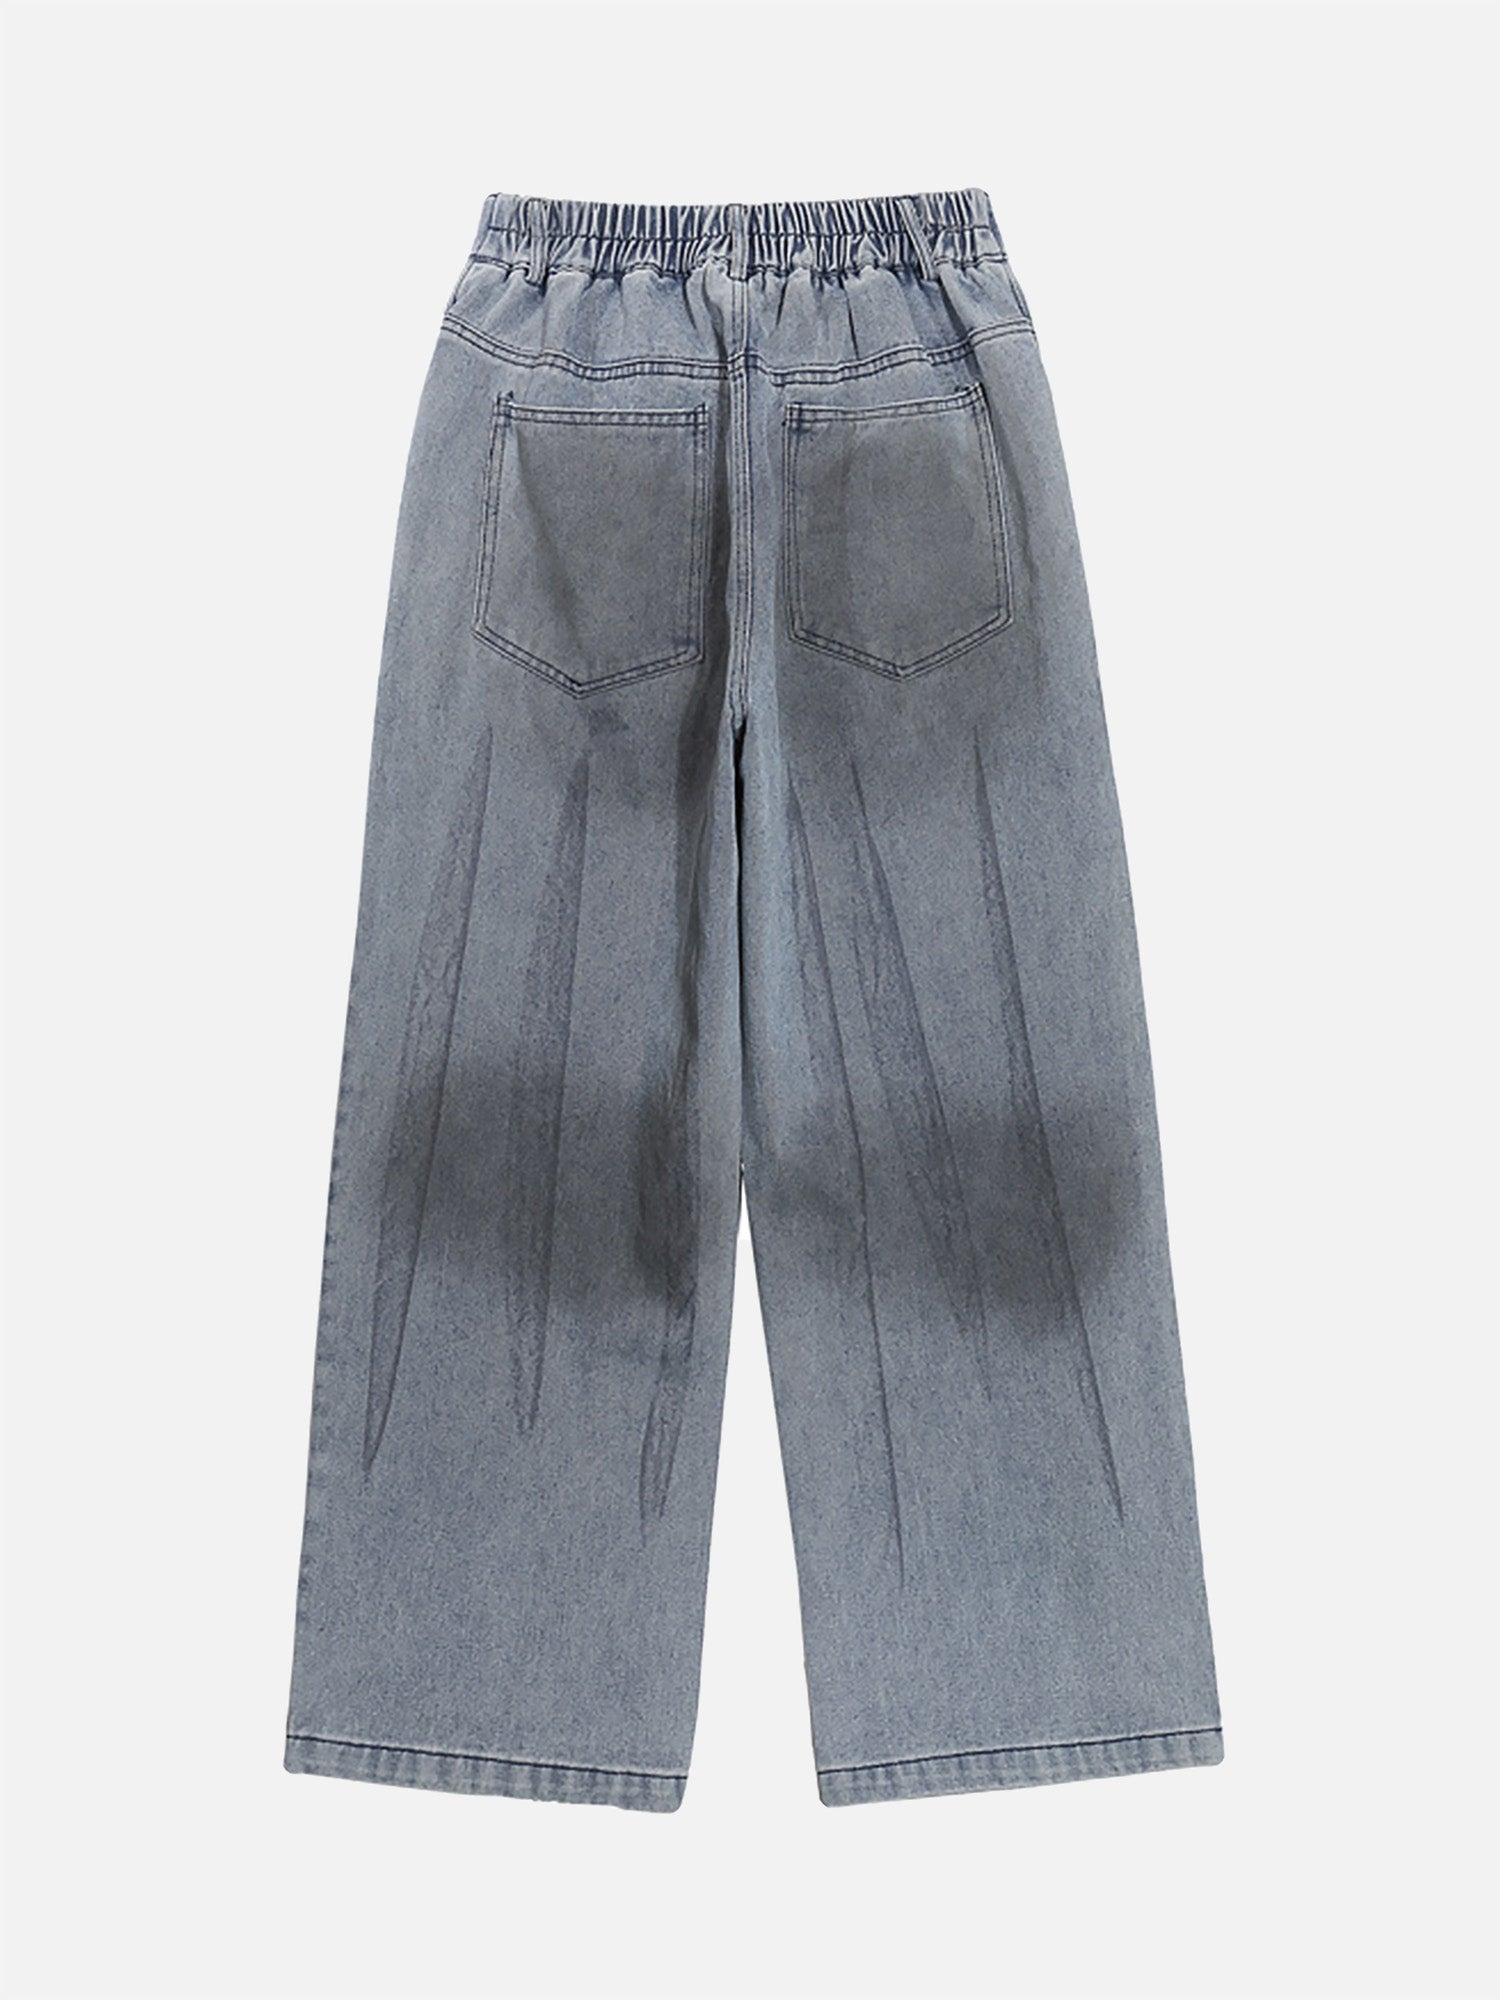 Thesupermade Creative Design Street Hip Hop Washed Jeans